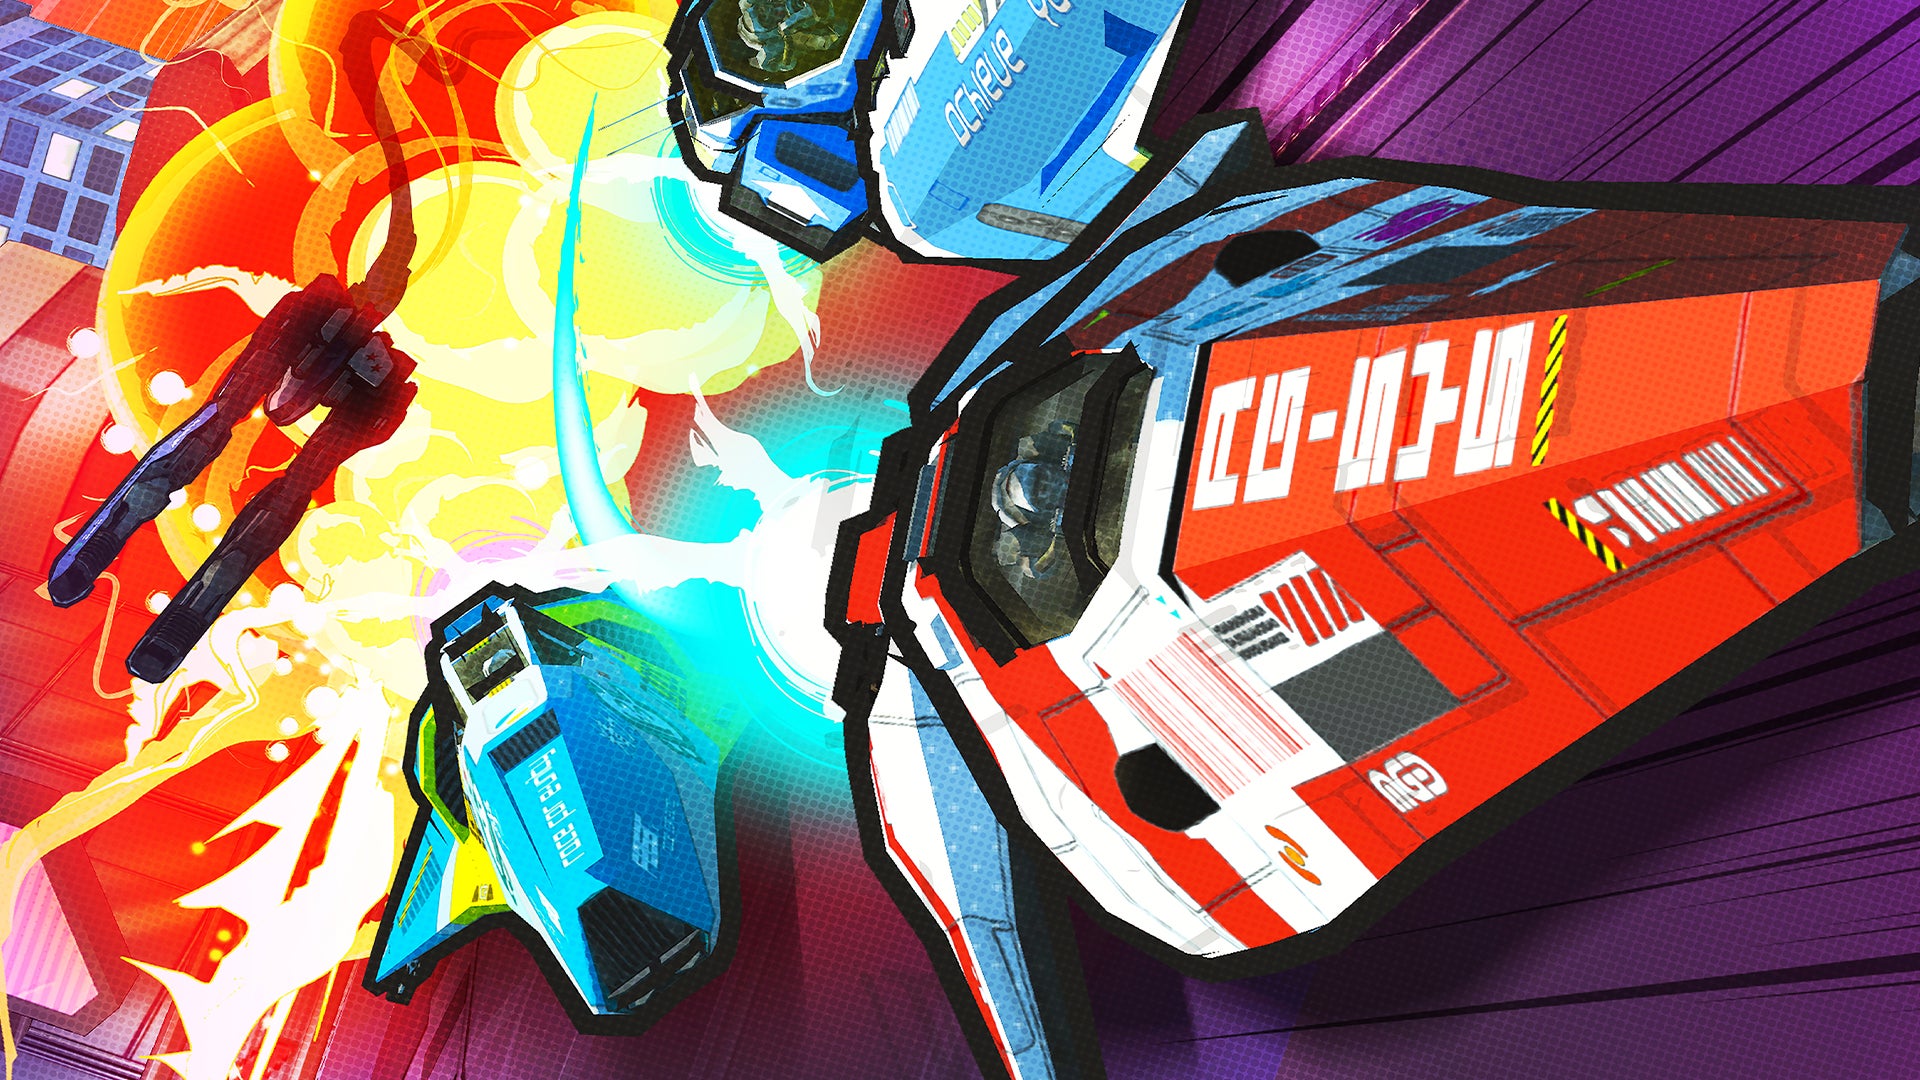 The WipEout saga is back with WipEout Rush, a mobile game